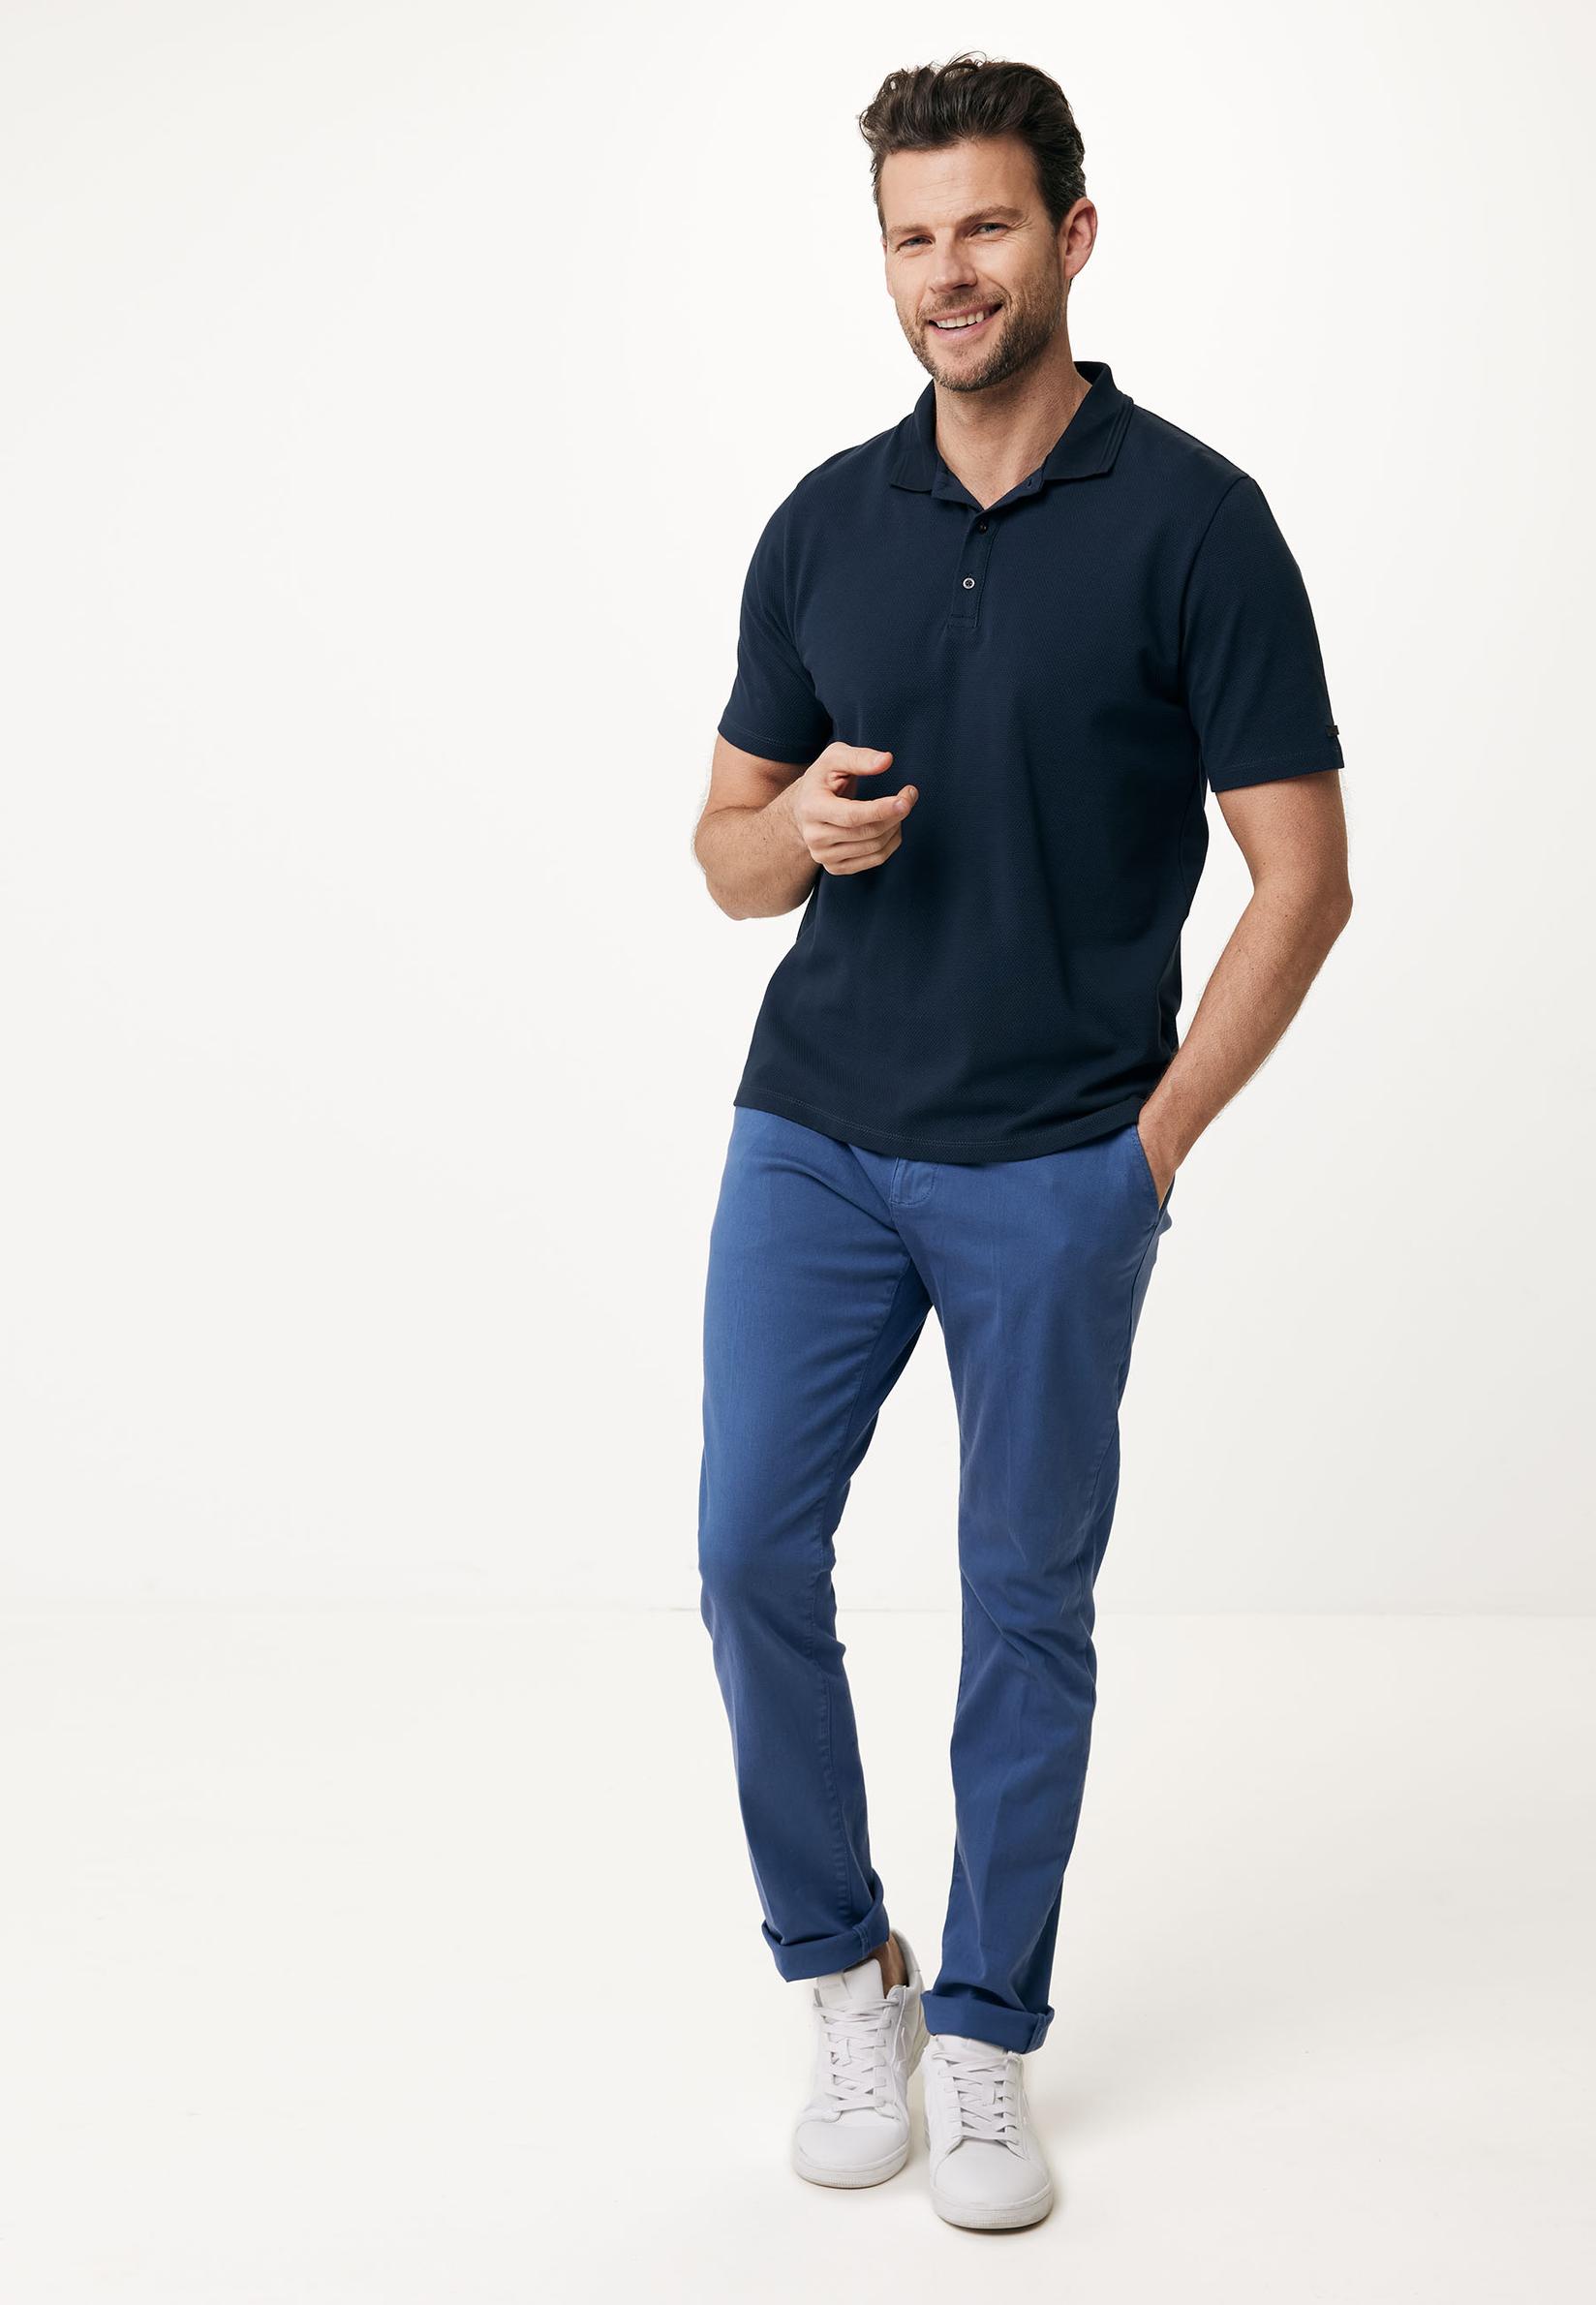 Selected image for MEXX Muške pantalone Gregory, Teget